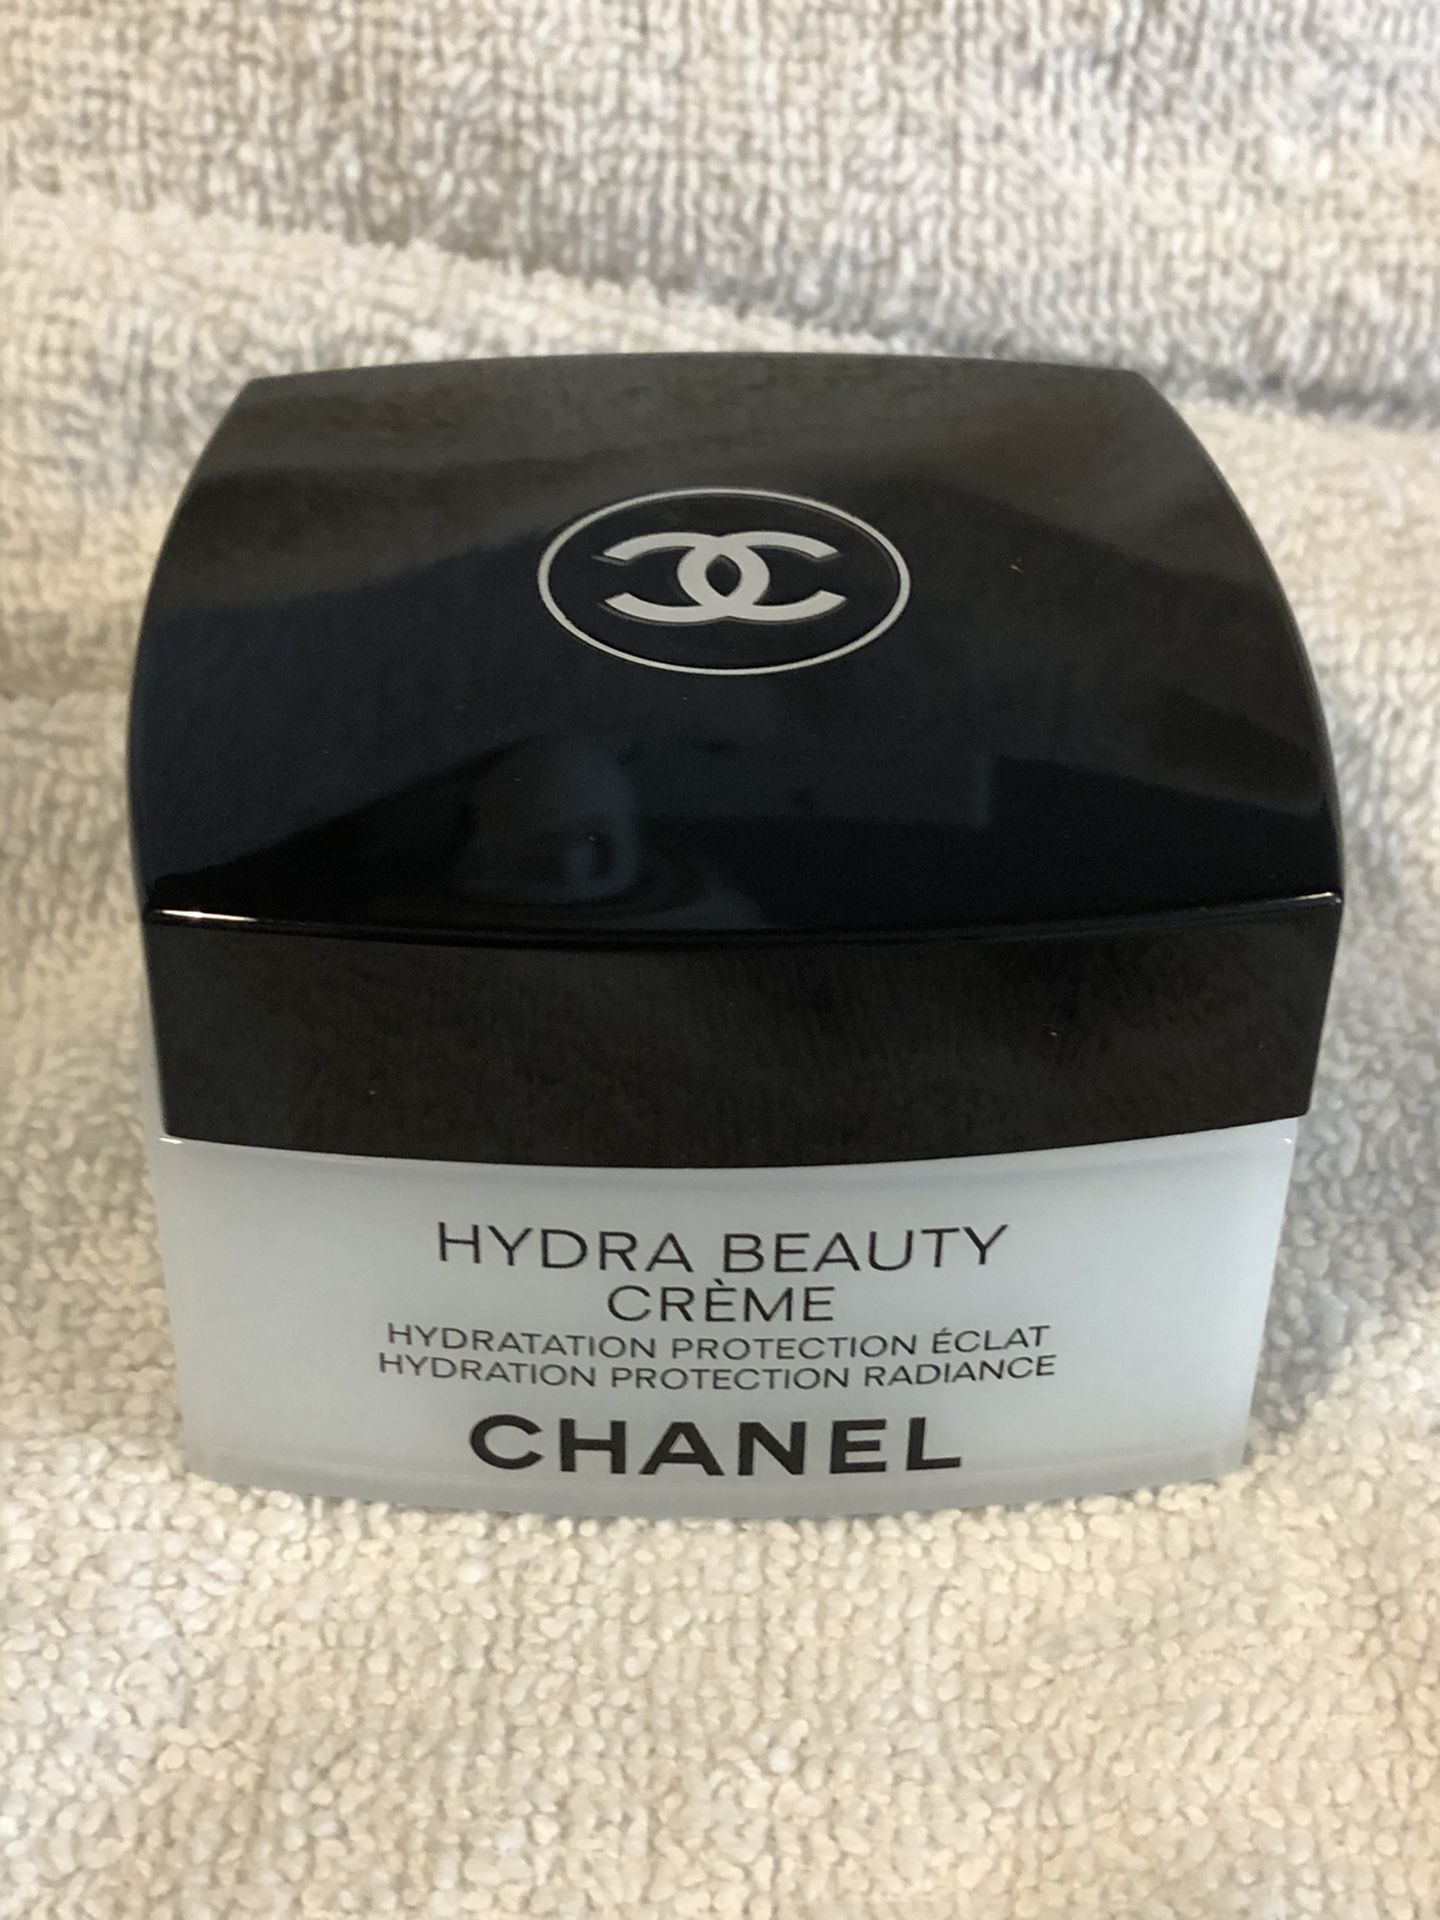 Authentic CHANEL Hydra Beauty Creme 1.7 oz makeup product - New!!